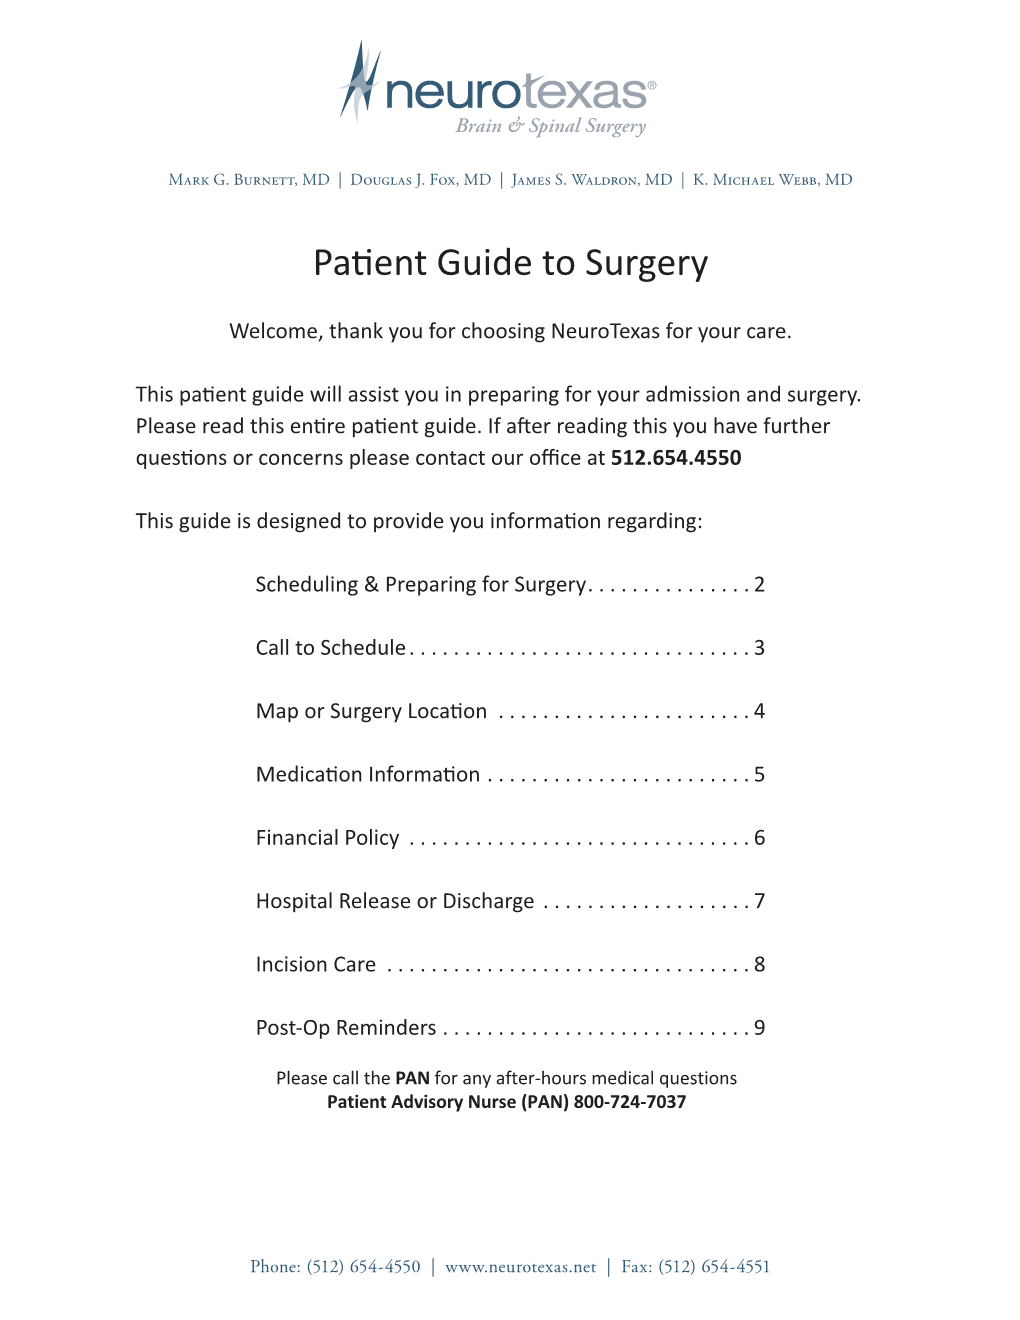 Patient Guide to Surgery